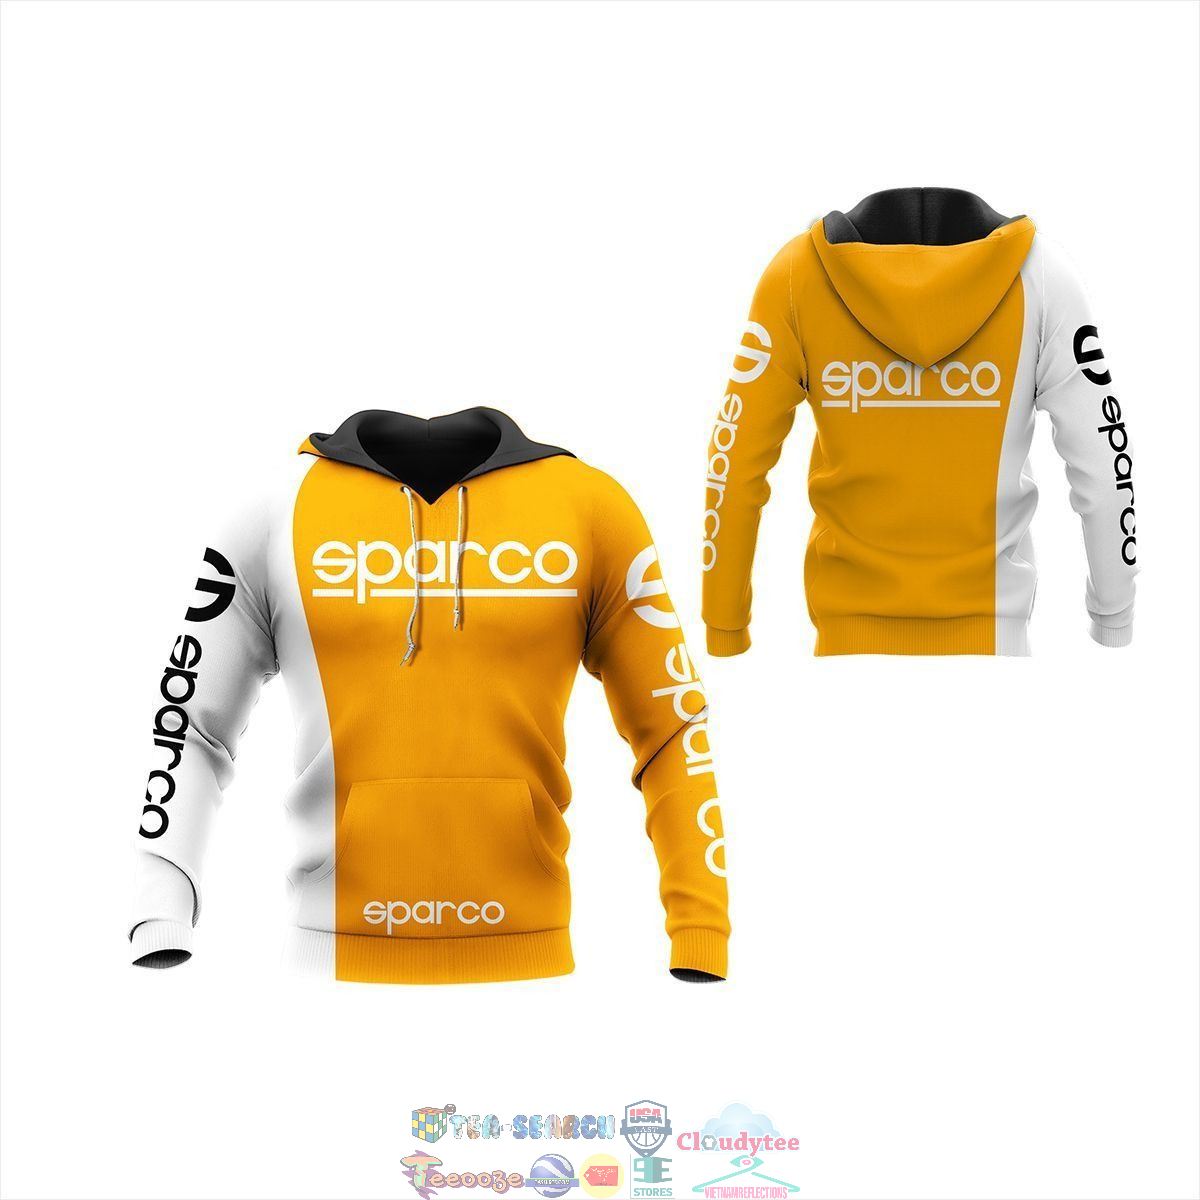 Sparco ver 38 3D hoodie and t-shirt